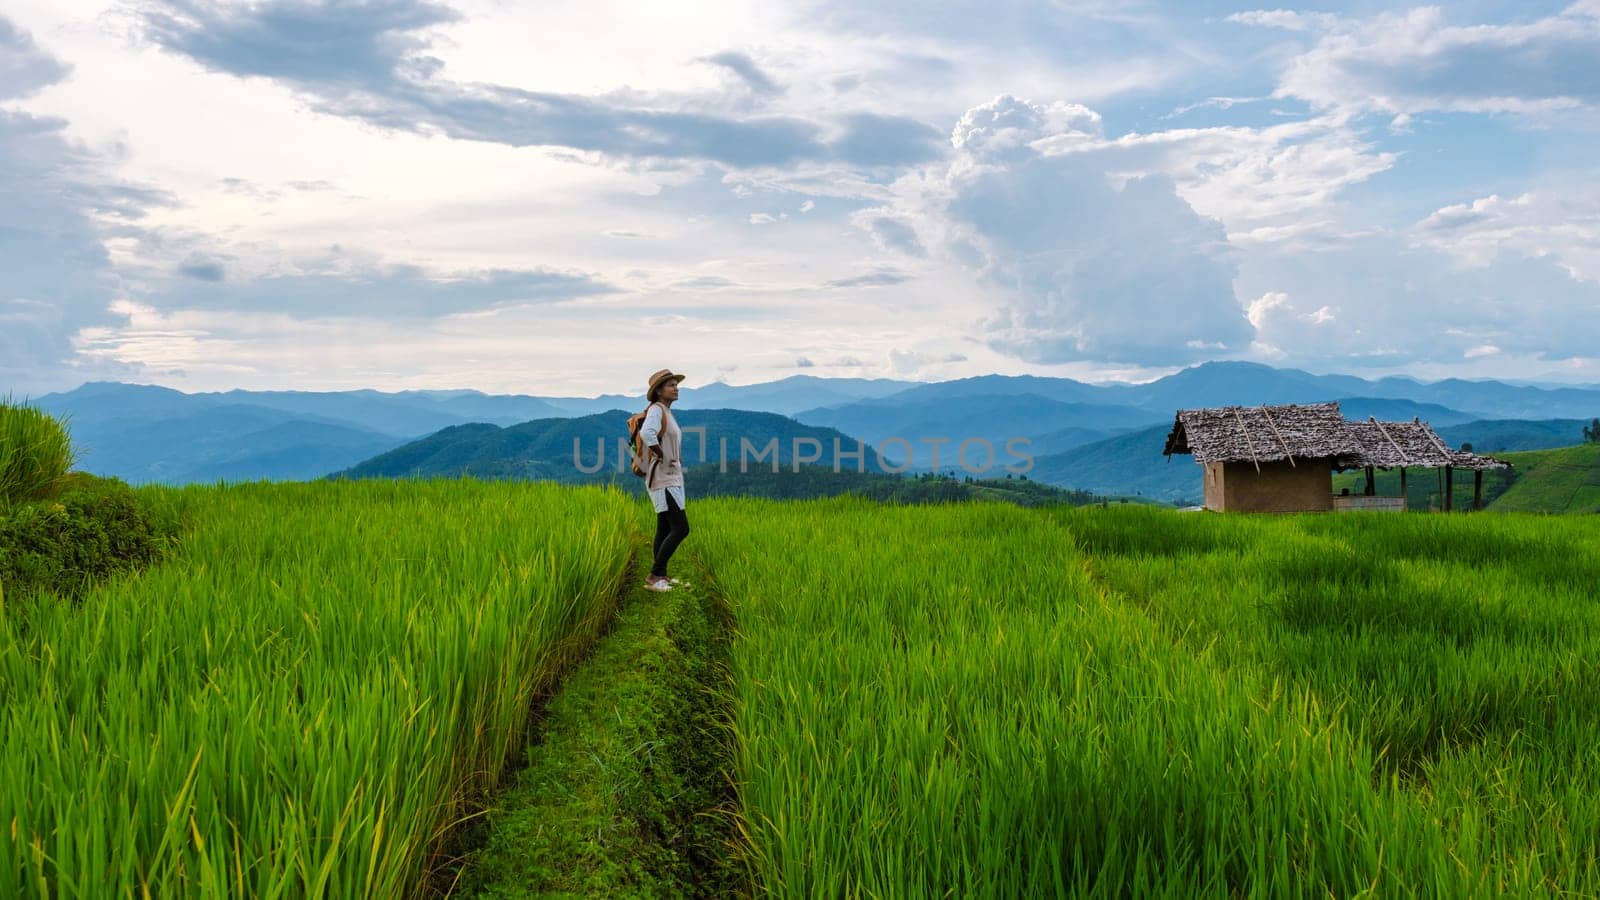 Terraced Rice Field in Chiangmai, Thailand, Pa Pong Piang rice terraces, green rice paddy fields during rain season. Asian woman walking hiking in the mountains at sunset